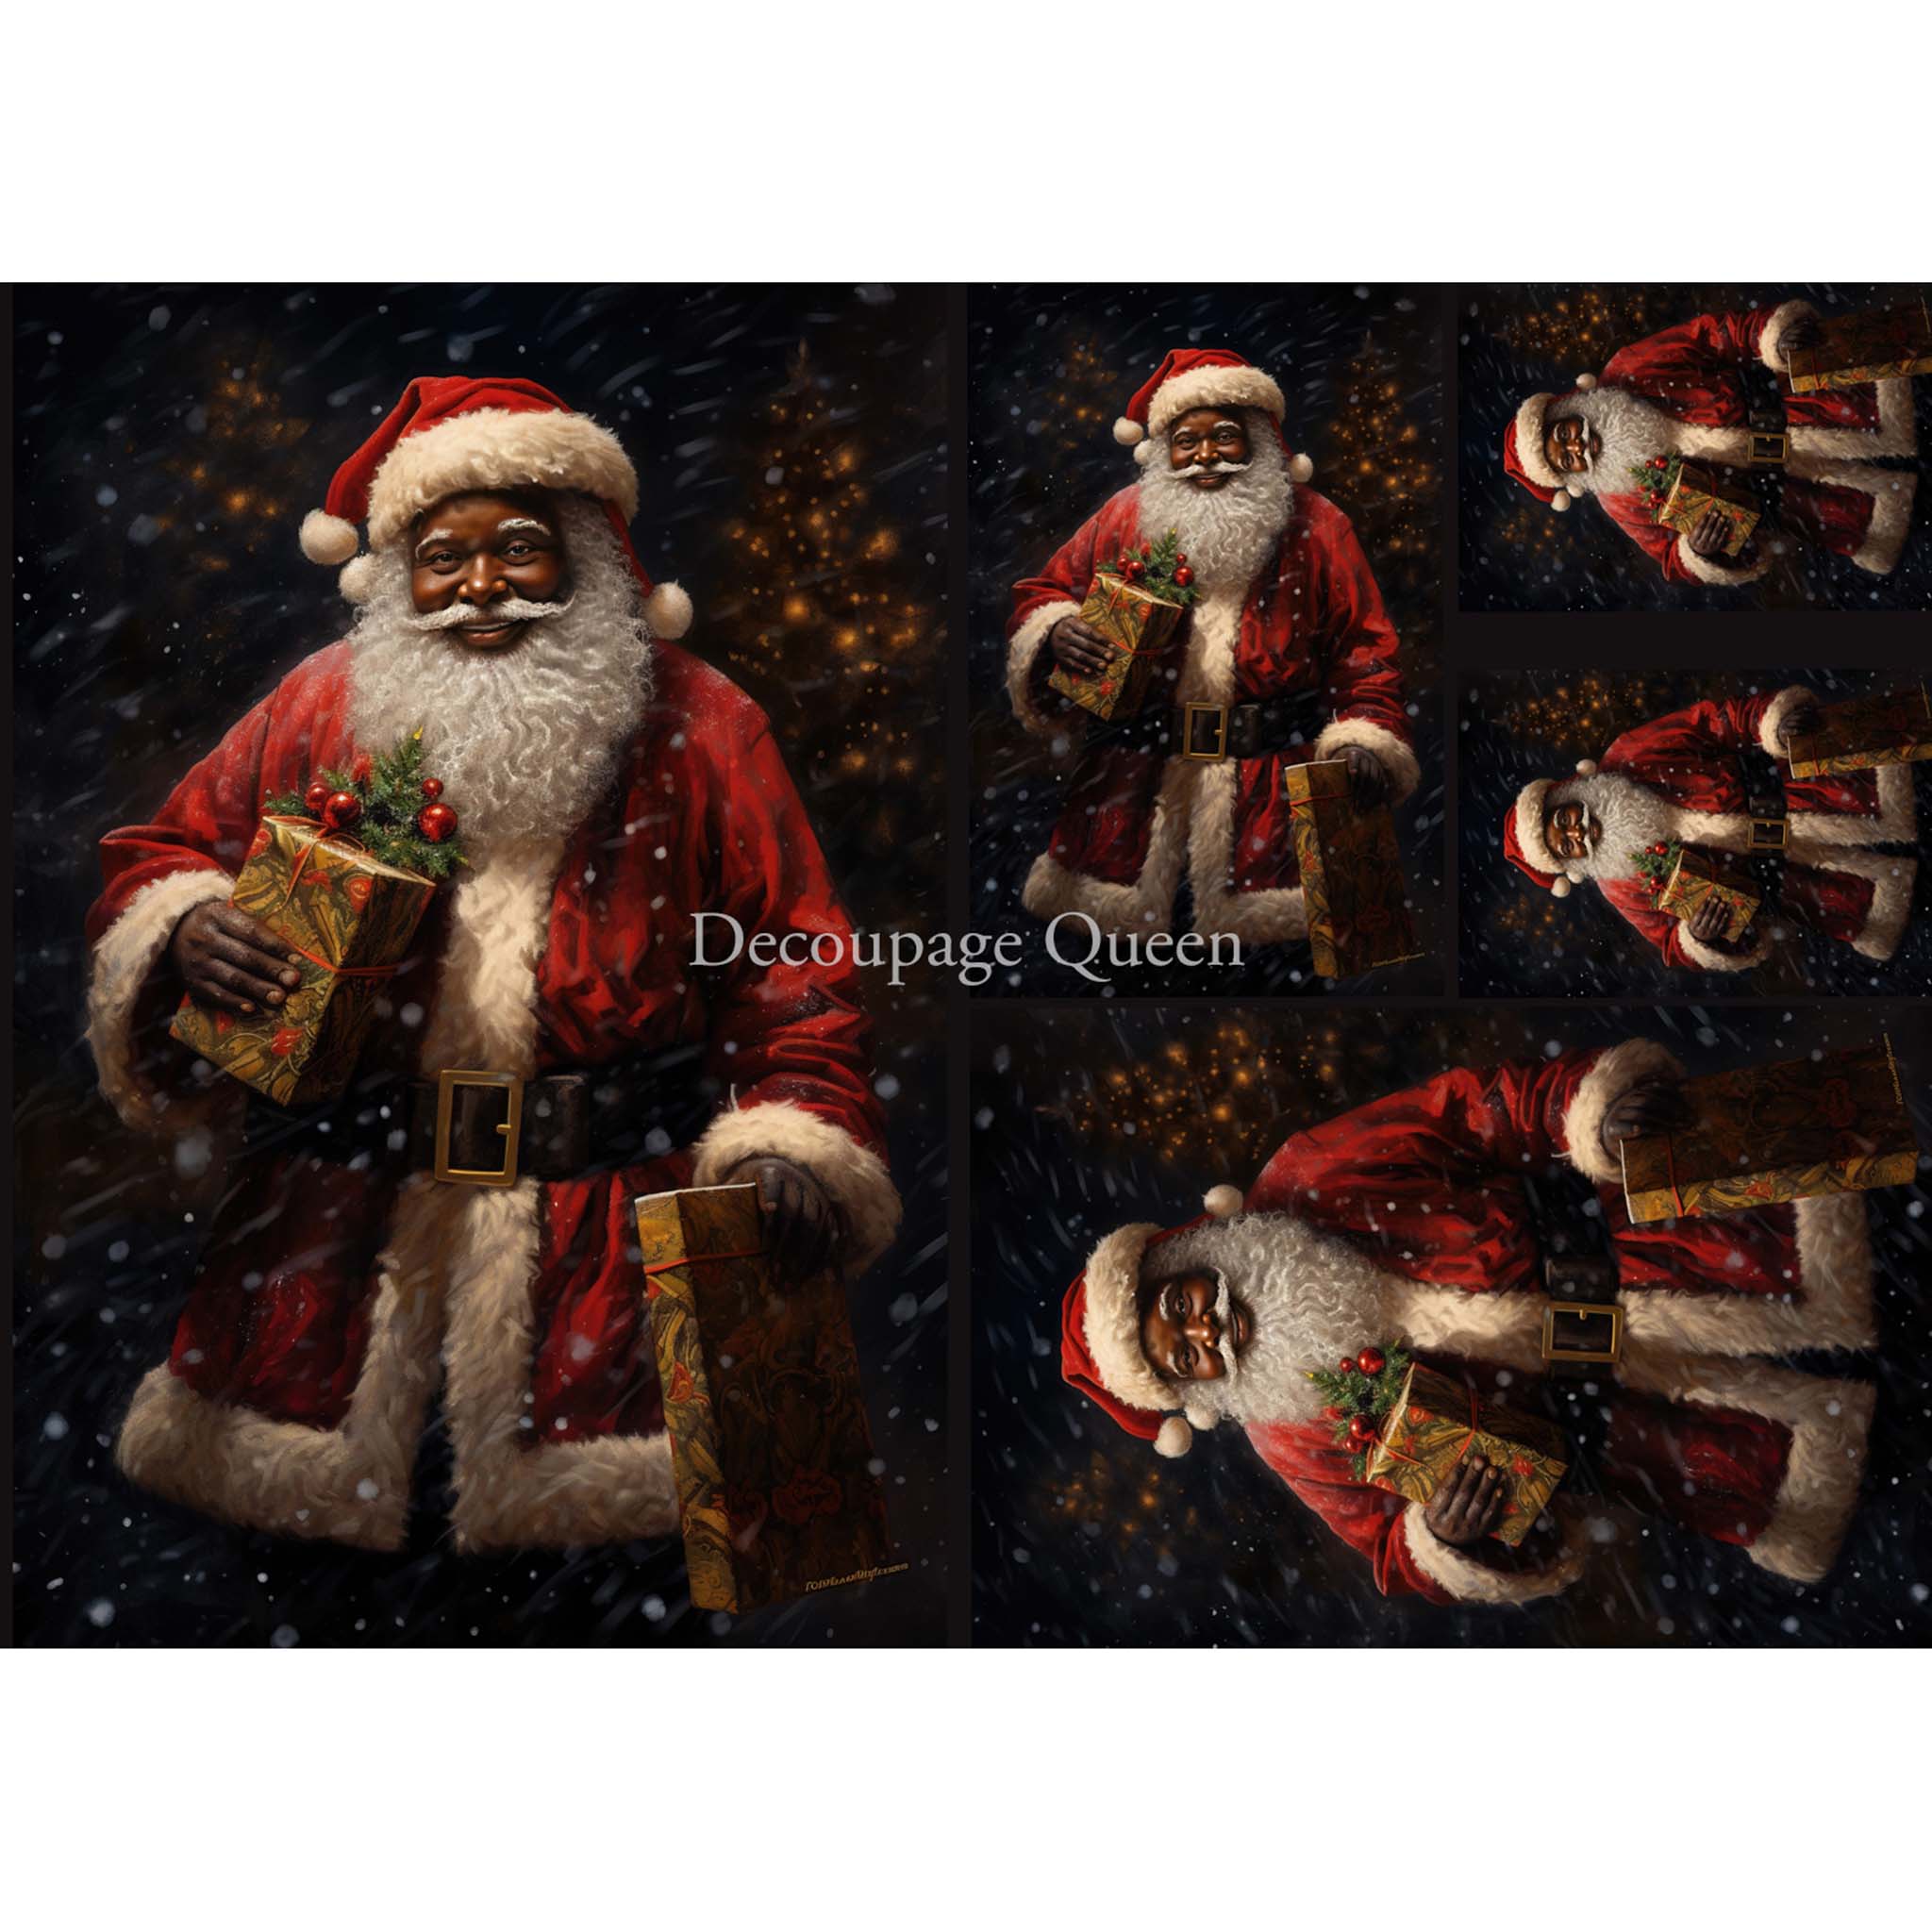 A3 rice paper design of 5 varying sizes that features a jolly Santa of dark complextion carrying presents surrounded by falling snow during a winter night with a faintly lit Christmas tree behind him.